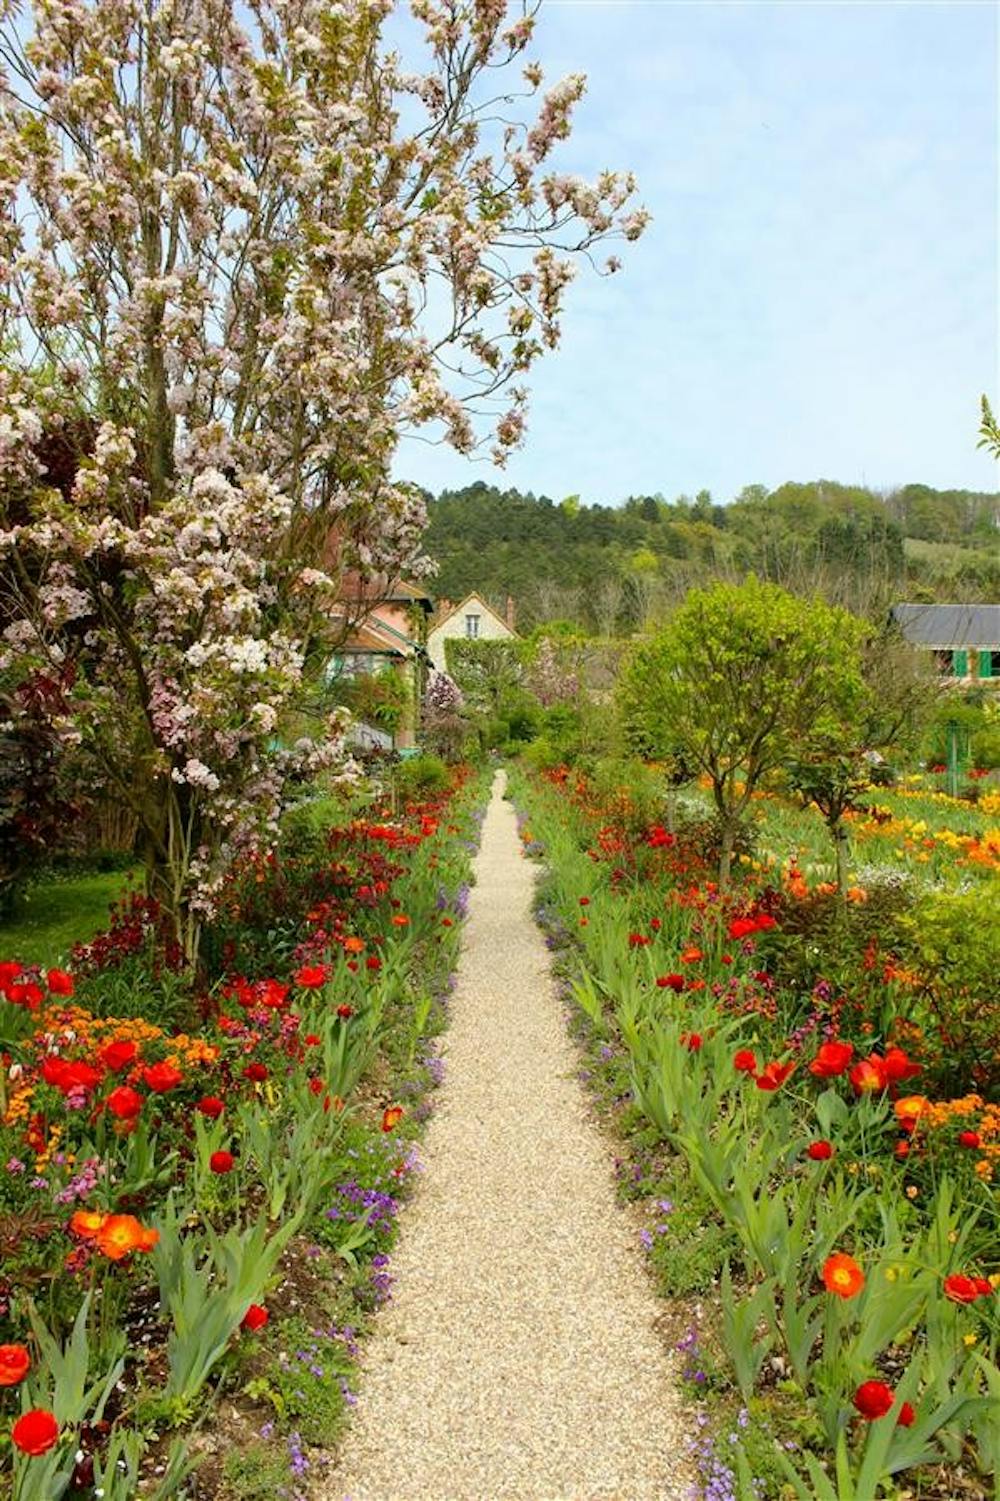 Giverny Gardens is a garden depicted in many of Claude Monet's impressionist artwork paintings. 